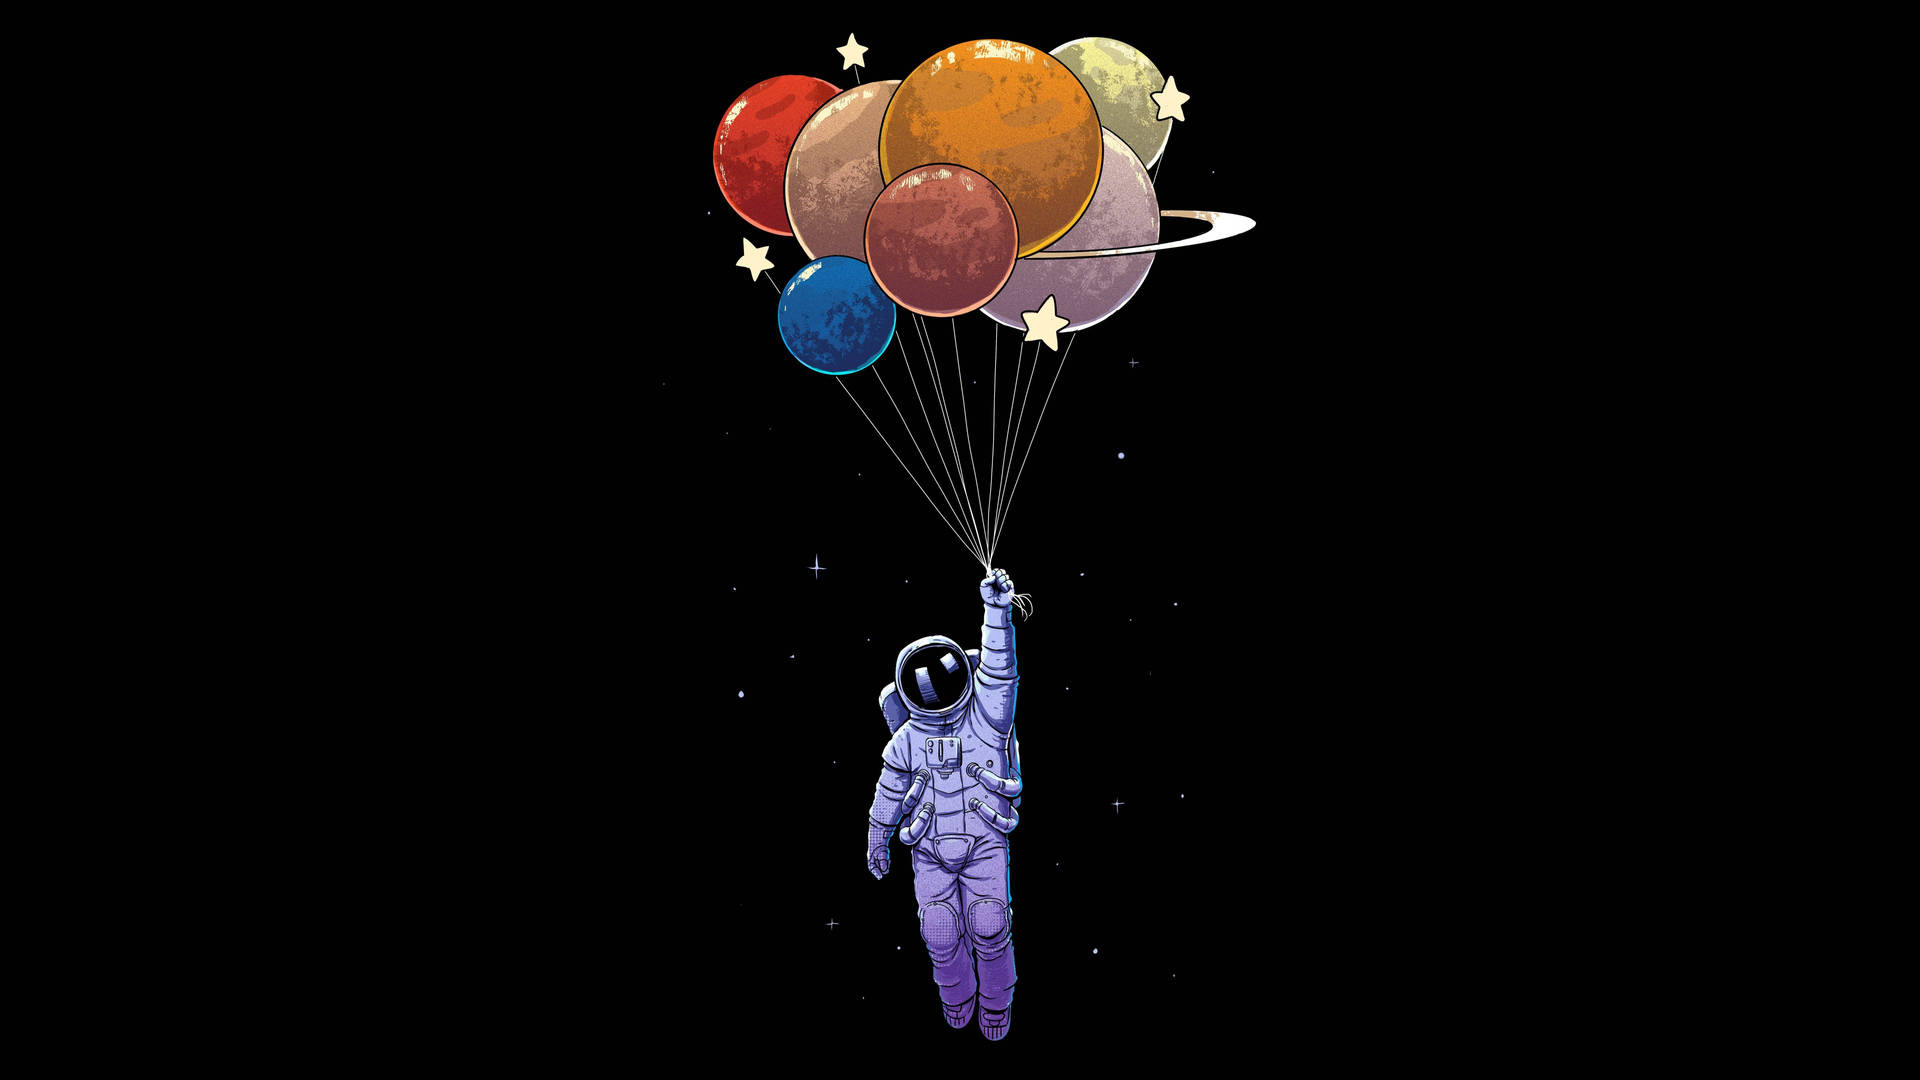 Black And White Astronaut Floats In Balloon Wallpaper